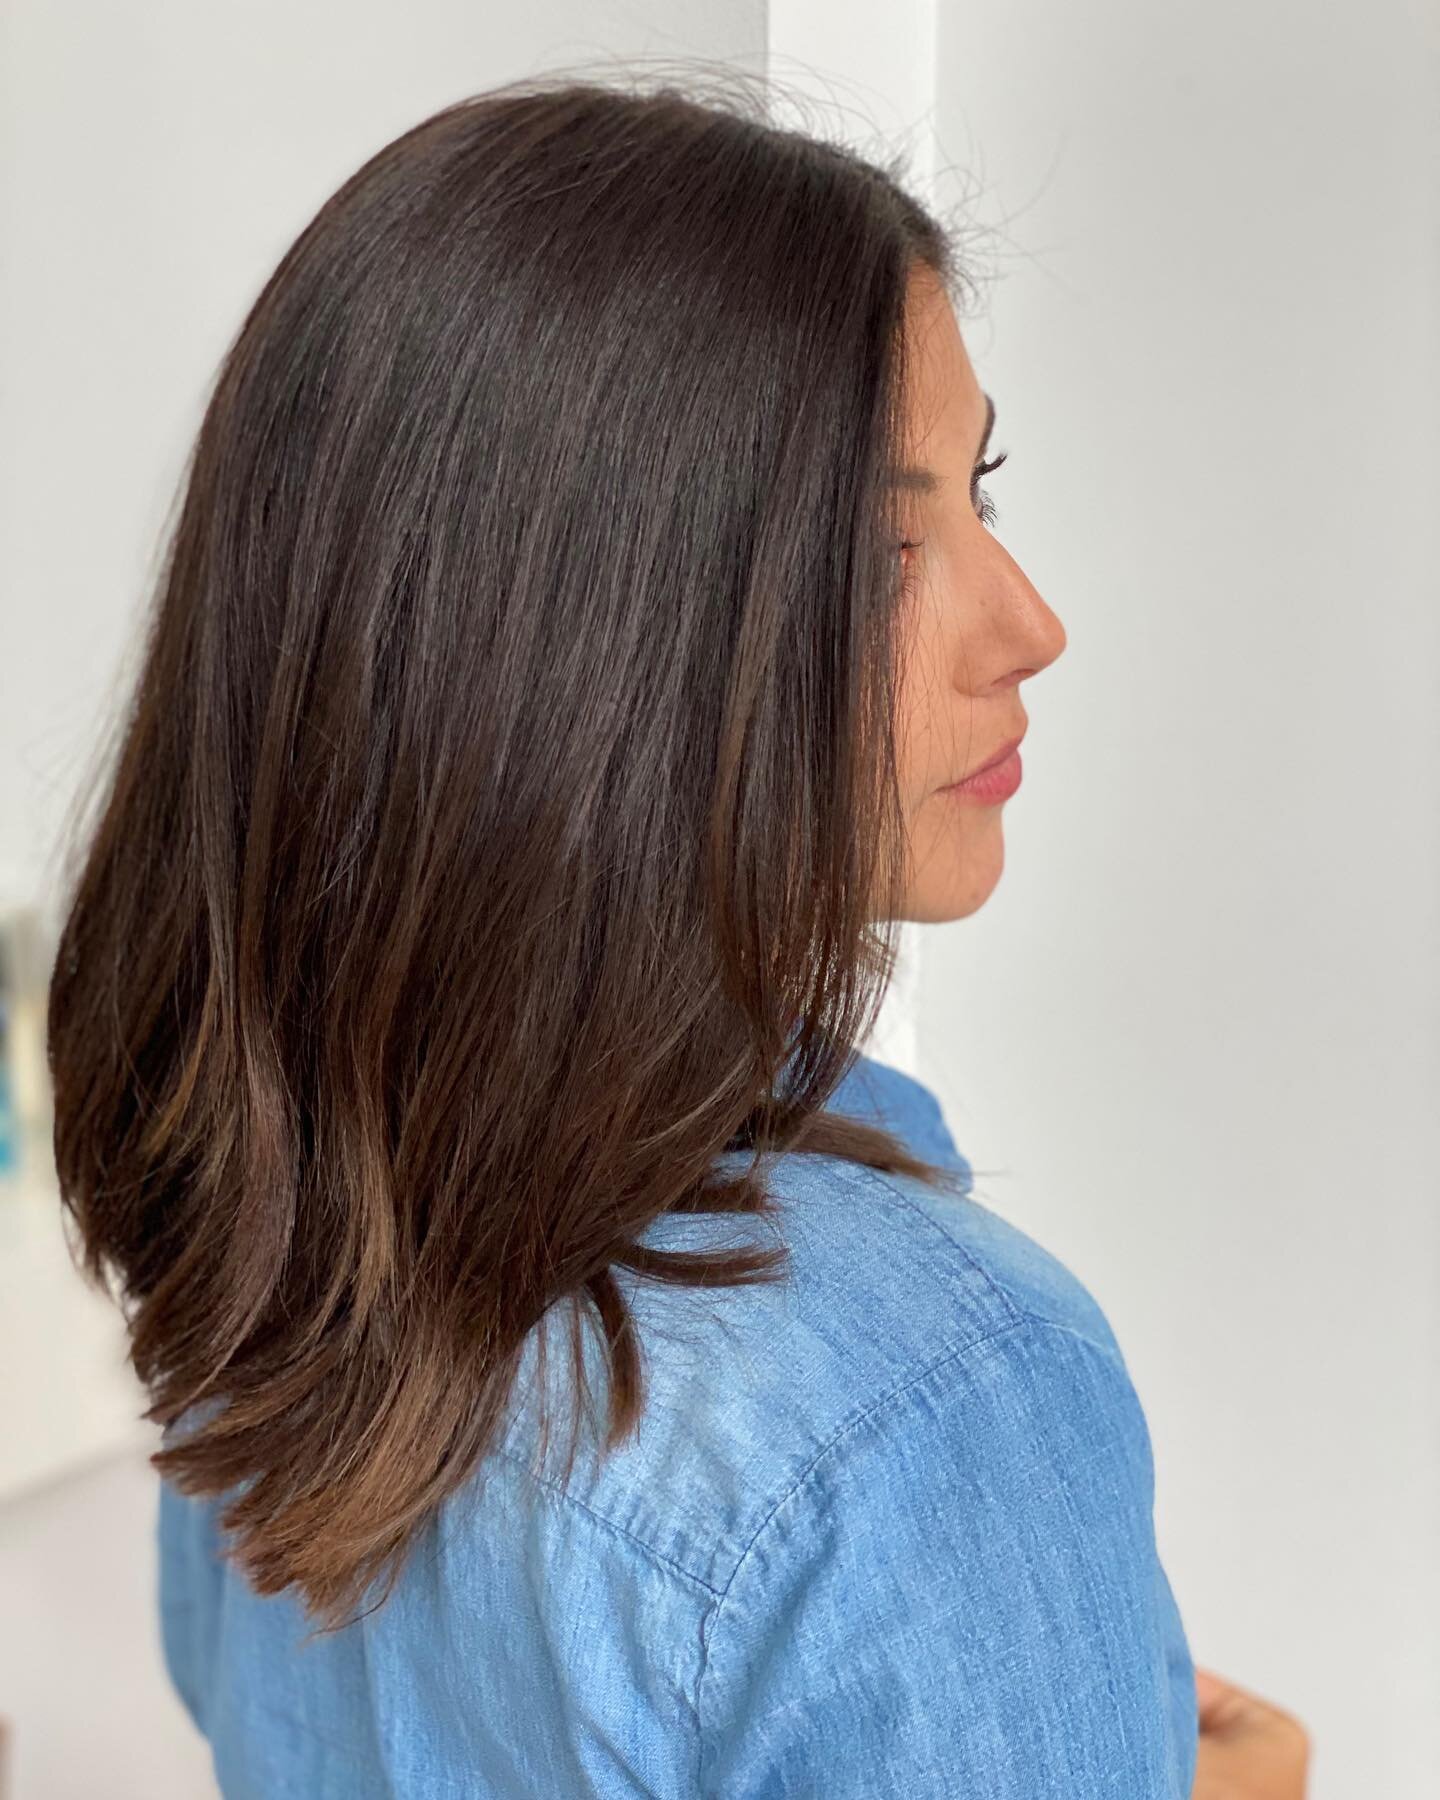 Subtle A-line makes a simple #longlayered #haircut look more interesting and grows in much better #alinecut @kimstock @momitorial @theouai @dysonhair @christopherobinparis